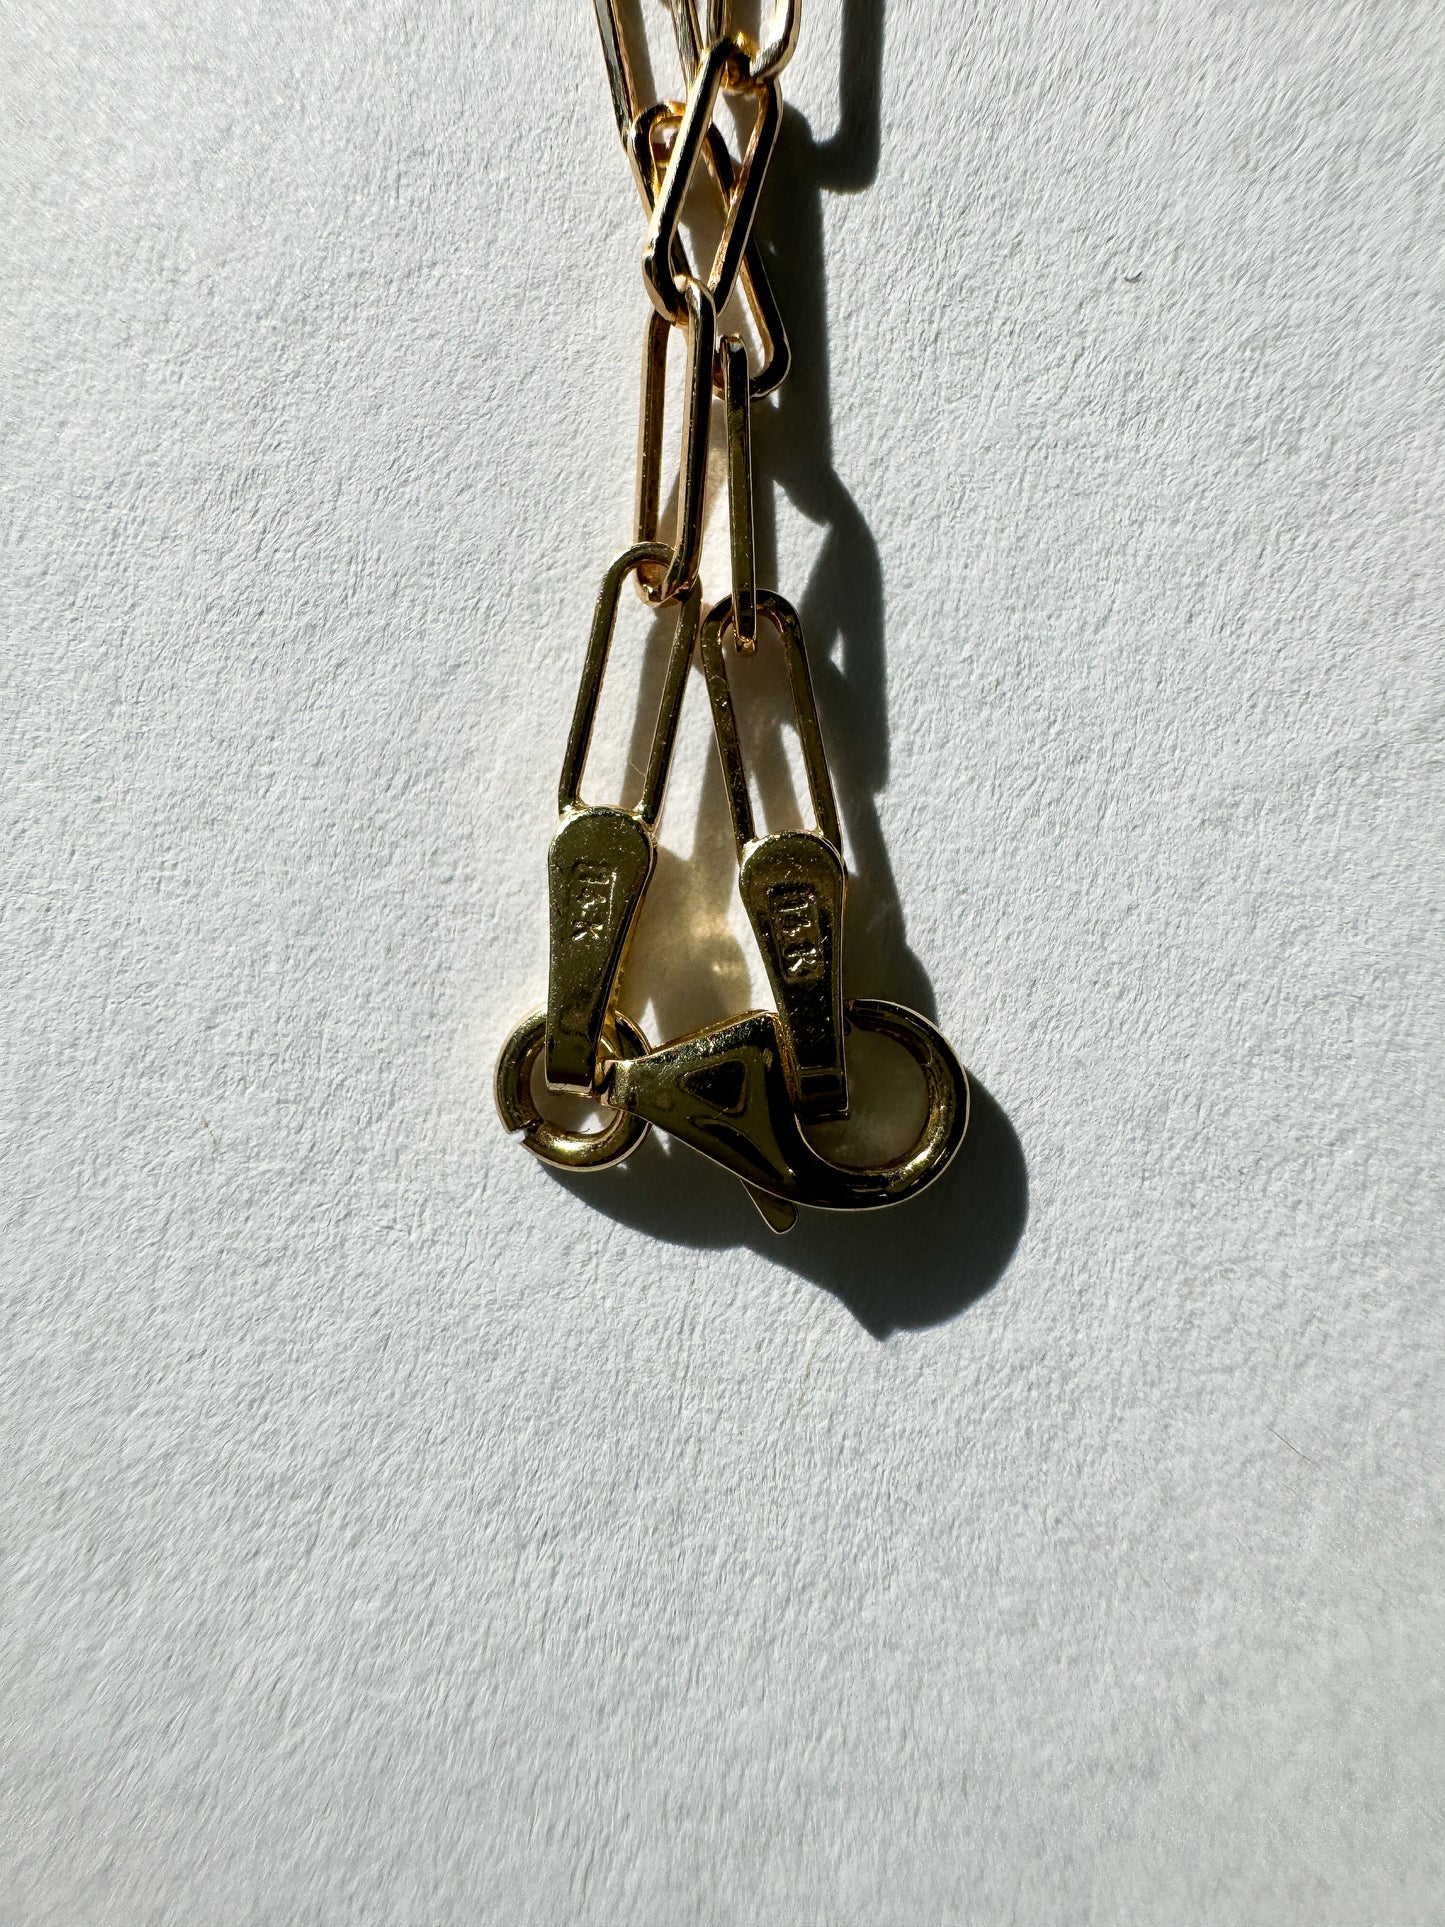 14k gold paper clip charm connector necklace 18”